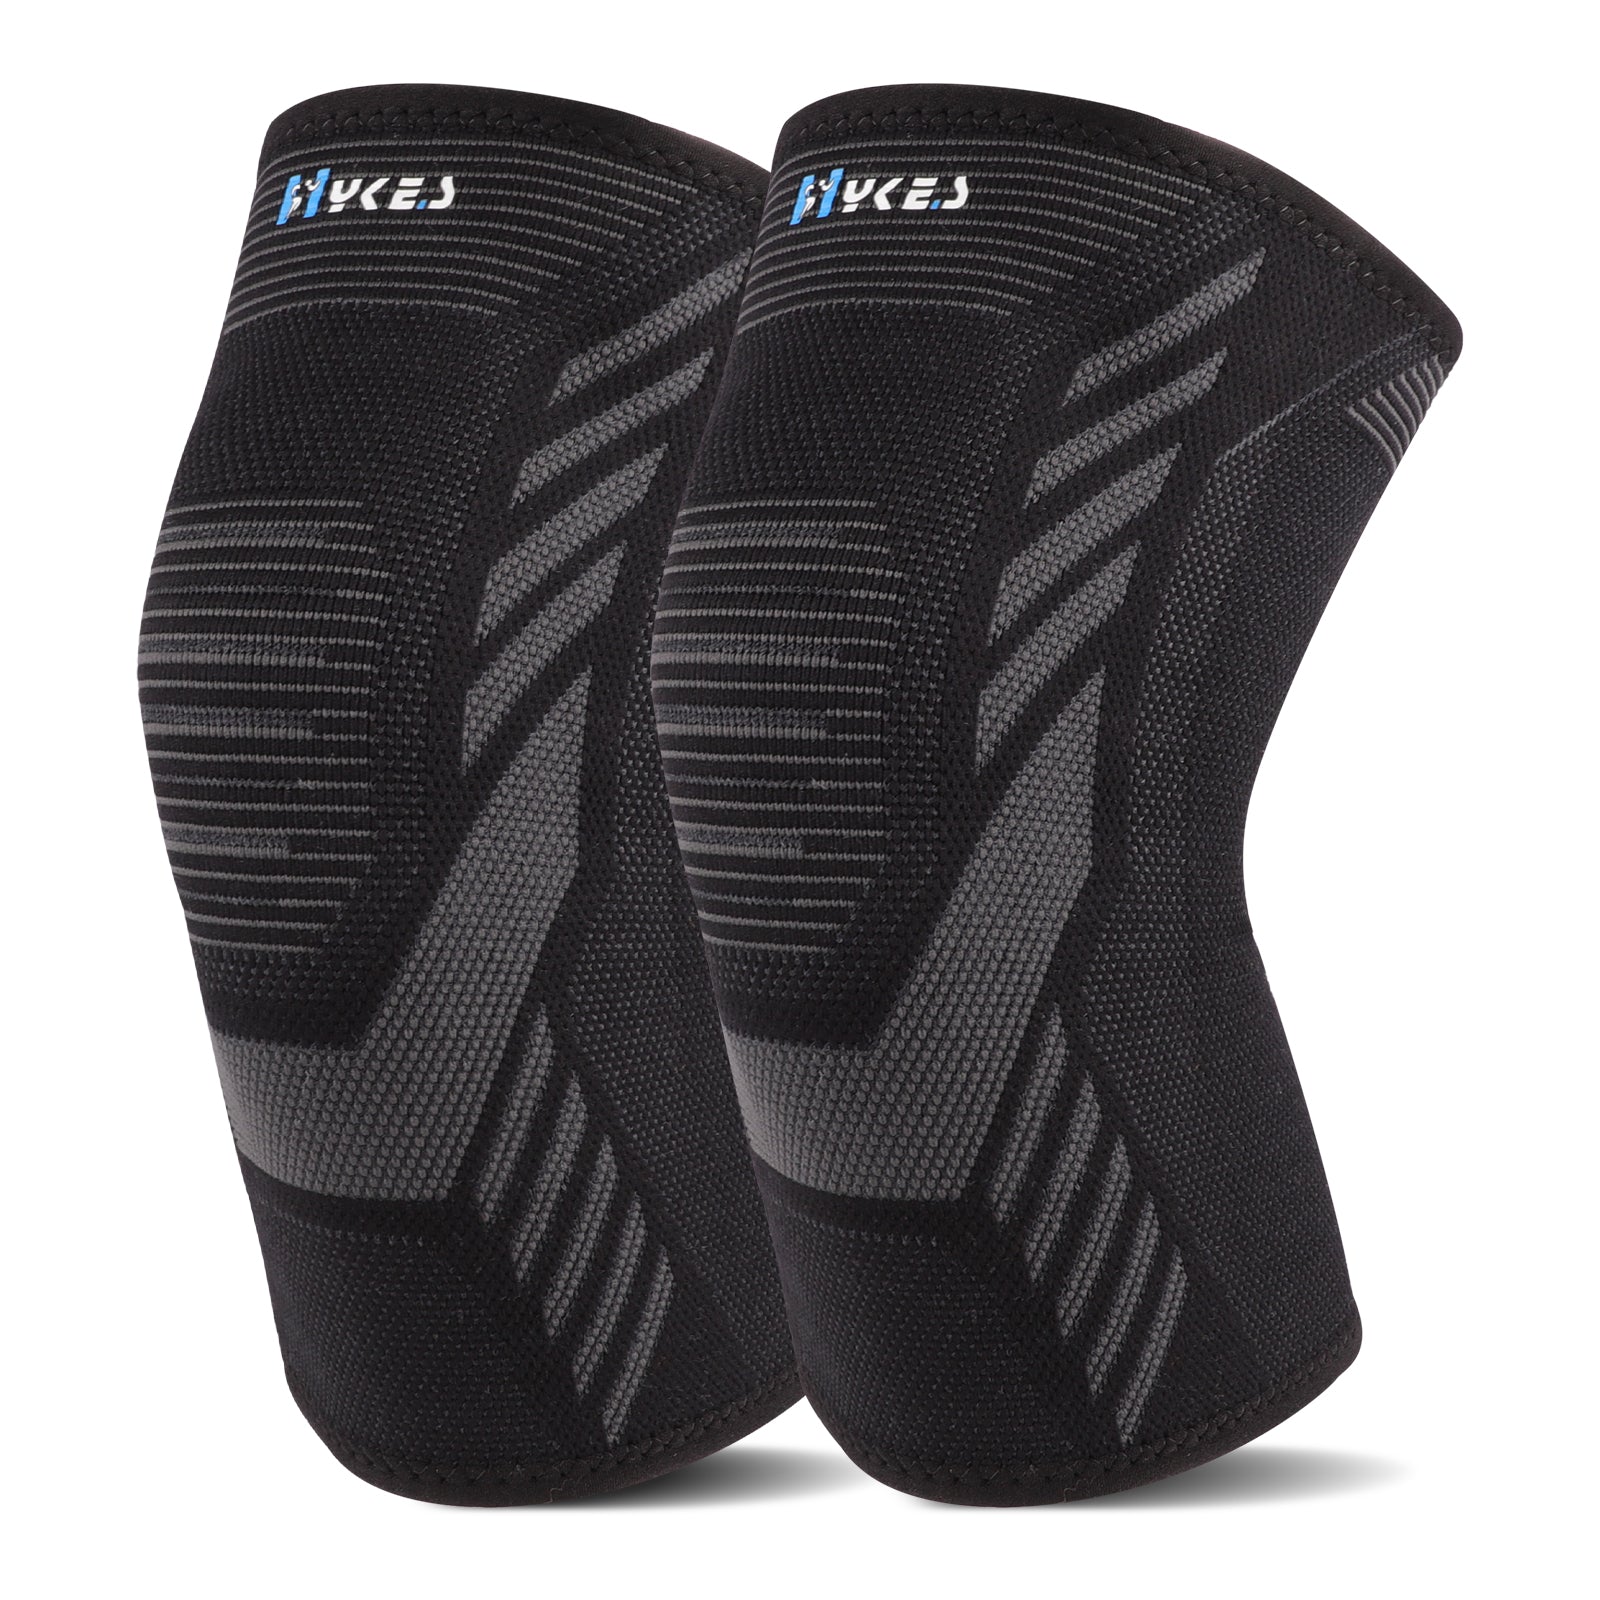 Knee Cap Compression Support Sleeve for Pain Relief Workout - Men & Women